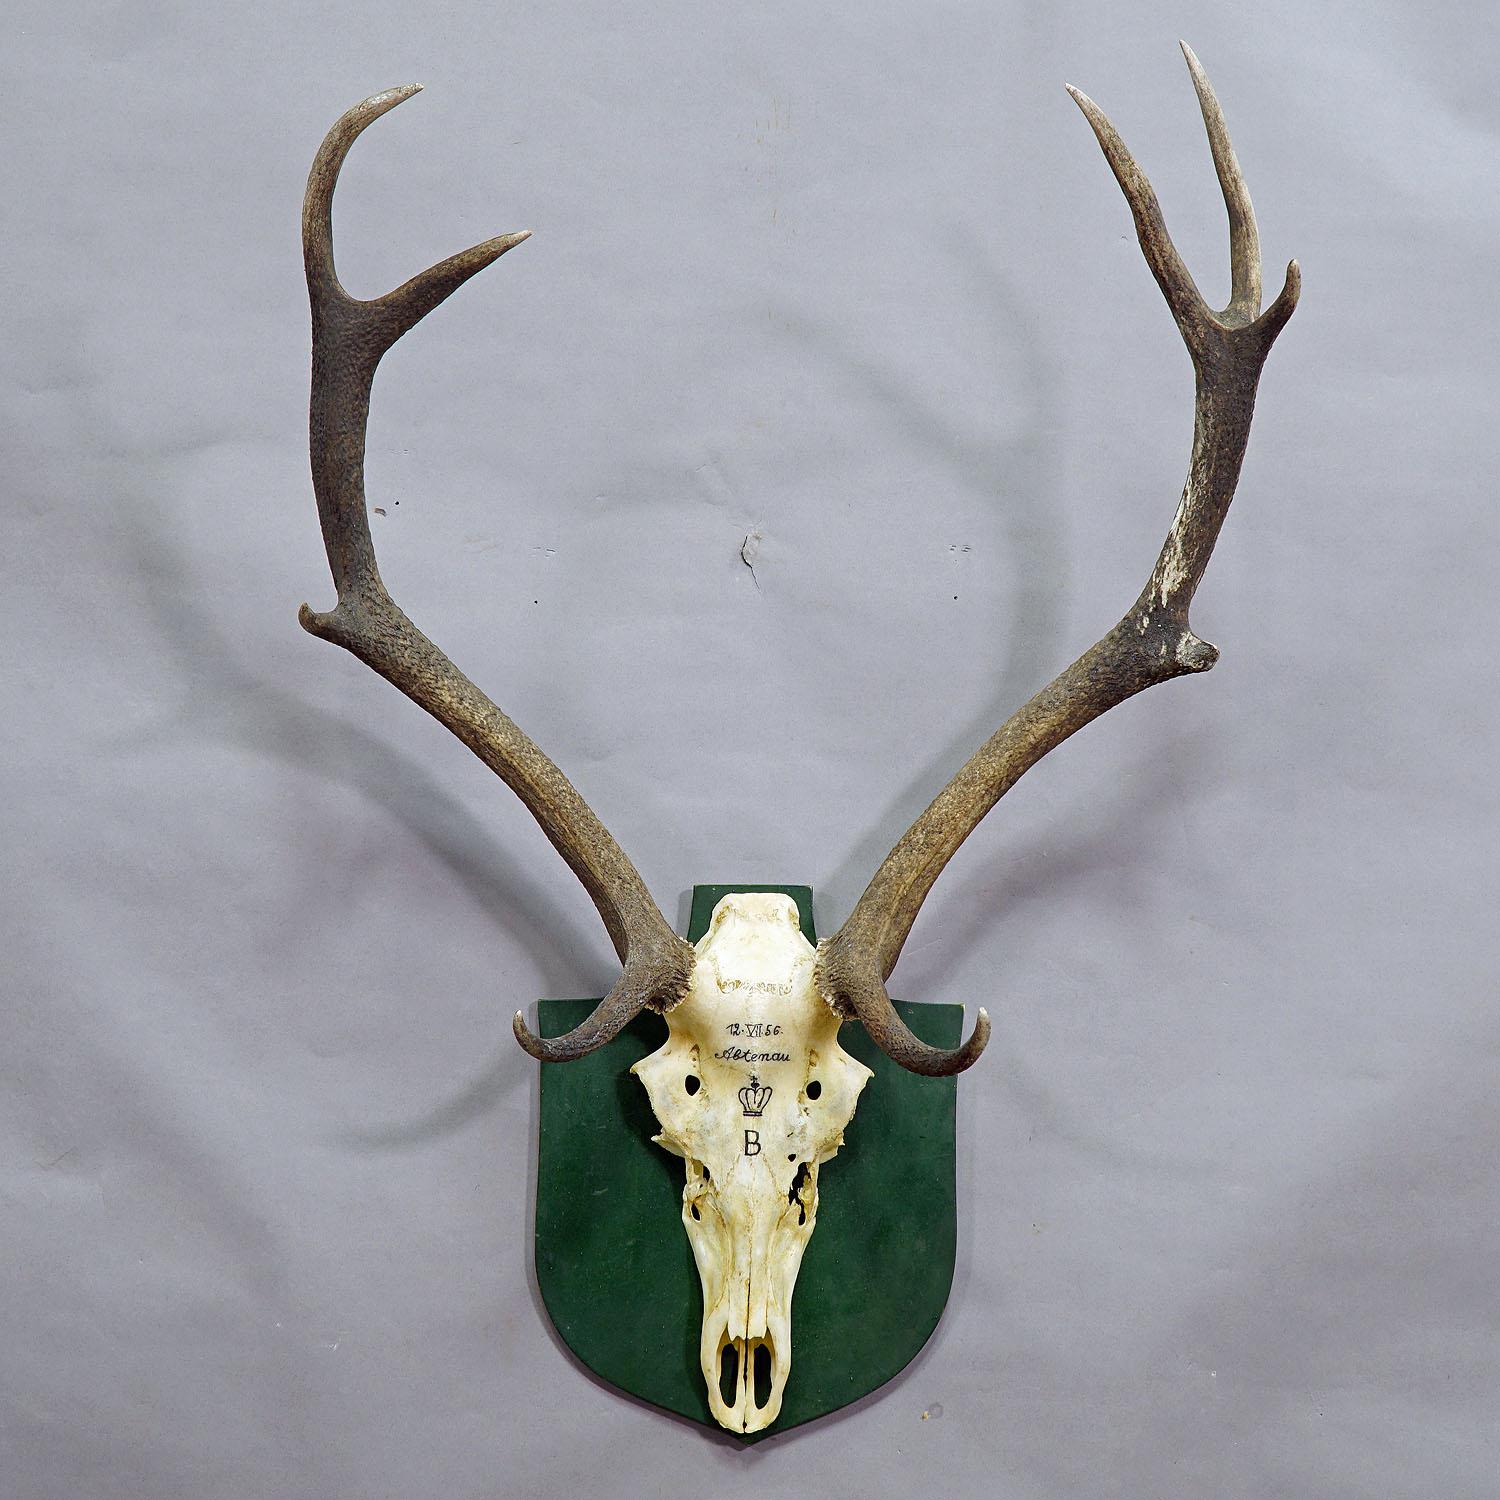 An uneven 10 pointer Black Forest deer trophy from the palace of Salem in South Germany. Shoot by a member of the lordly family of Baden in 1956. Handwritten inscriptions on the skull with, place of the hunt, family crest and date. Mounted on a